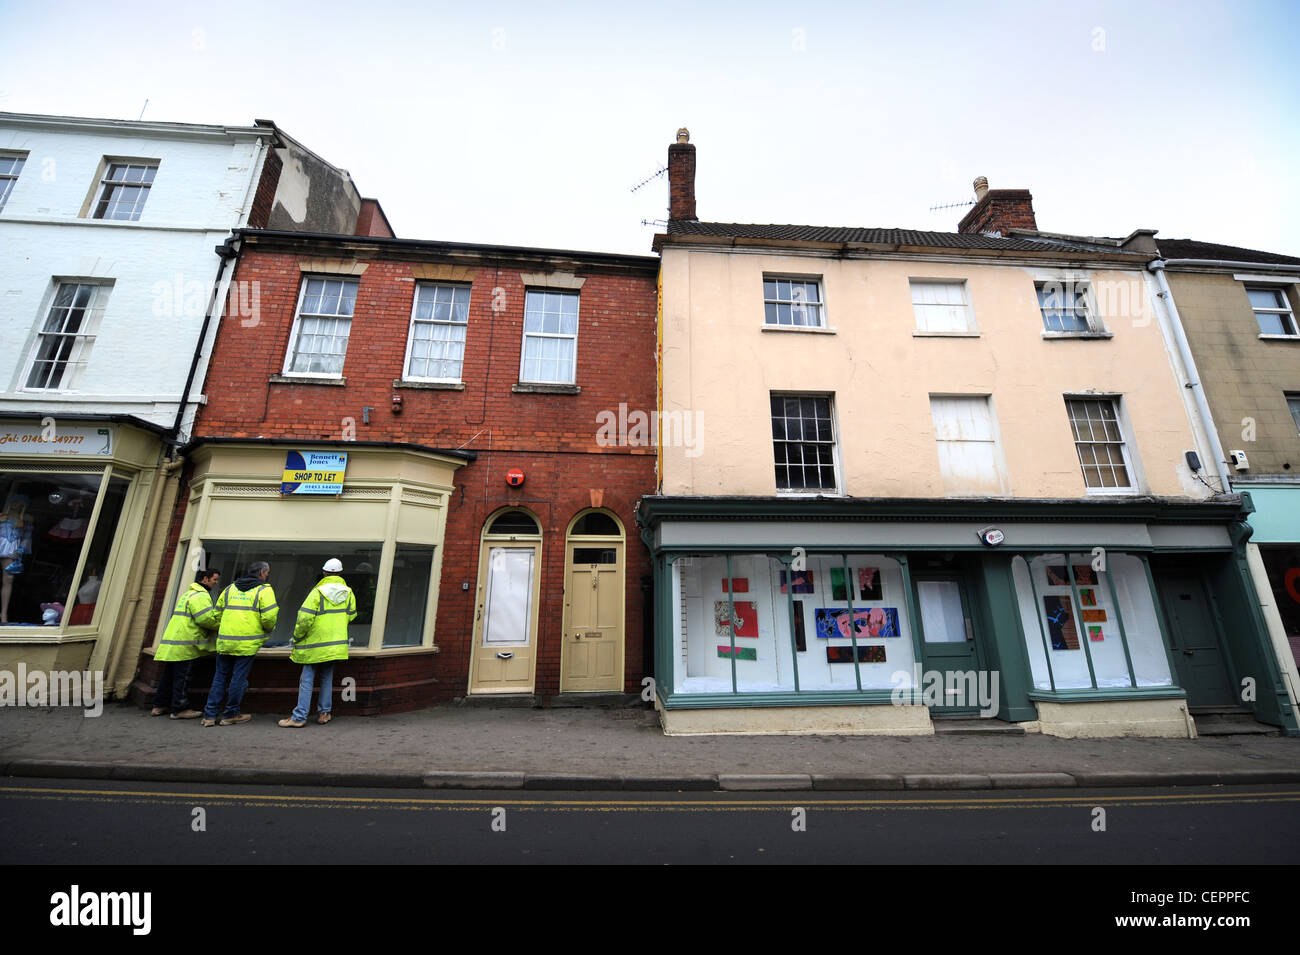 Construction workers look into an unoccupied shop in temporary use as an art gallery in Dursley, Gloucestershire, UK Stock Photo